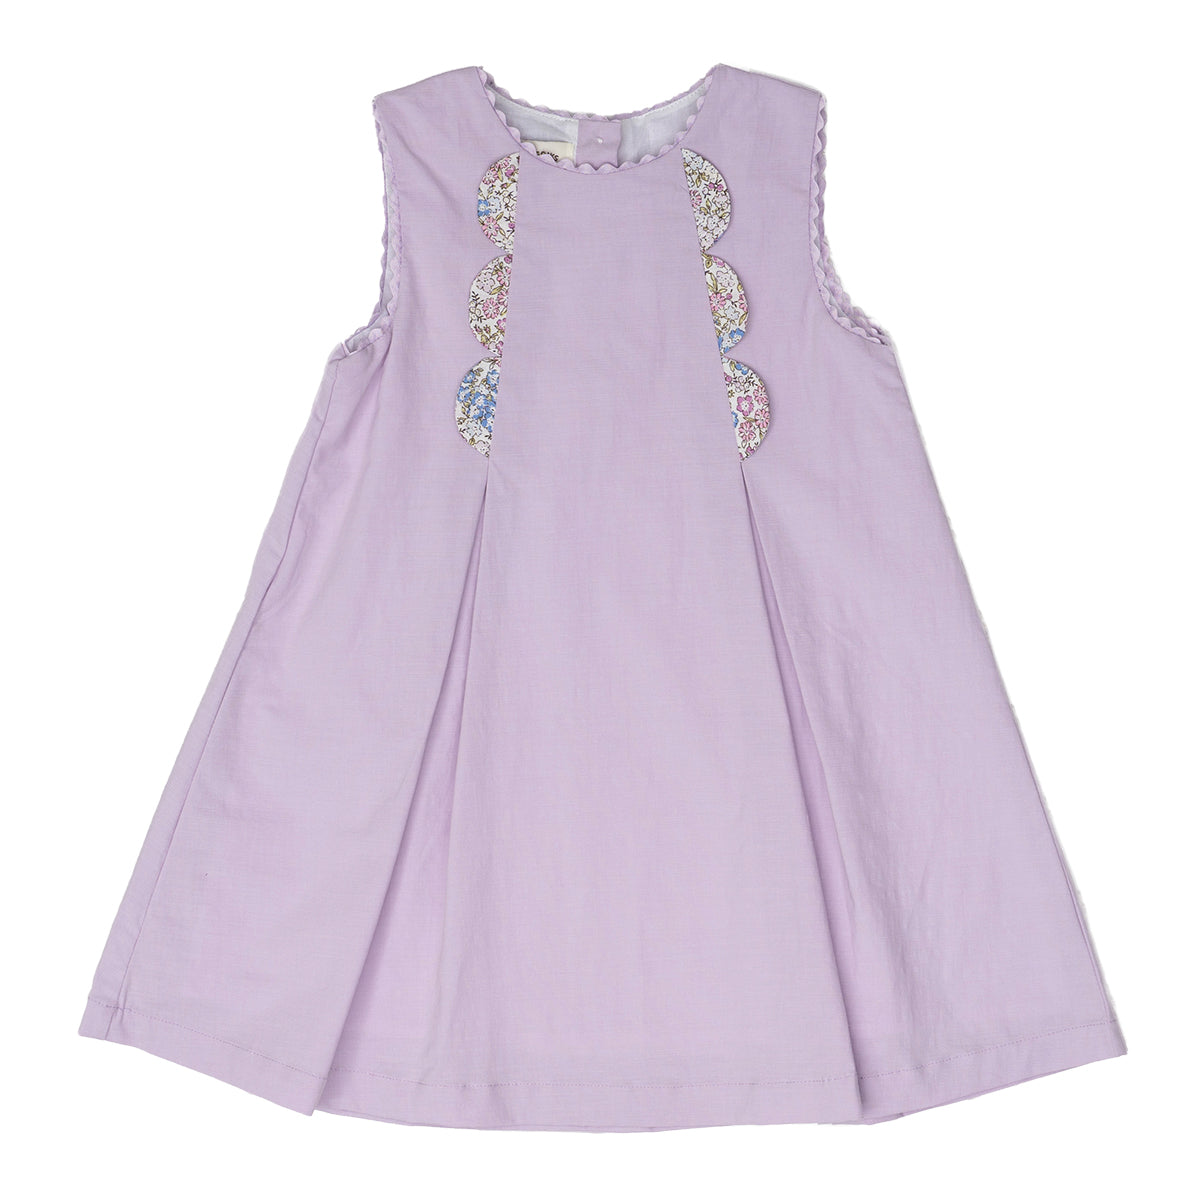 Girl's Lilac Floral Sleeveless Dress by The Oaks Apparel